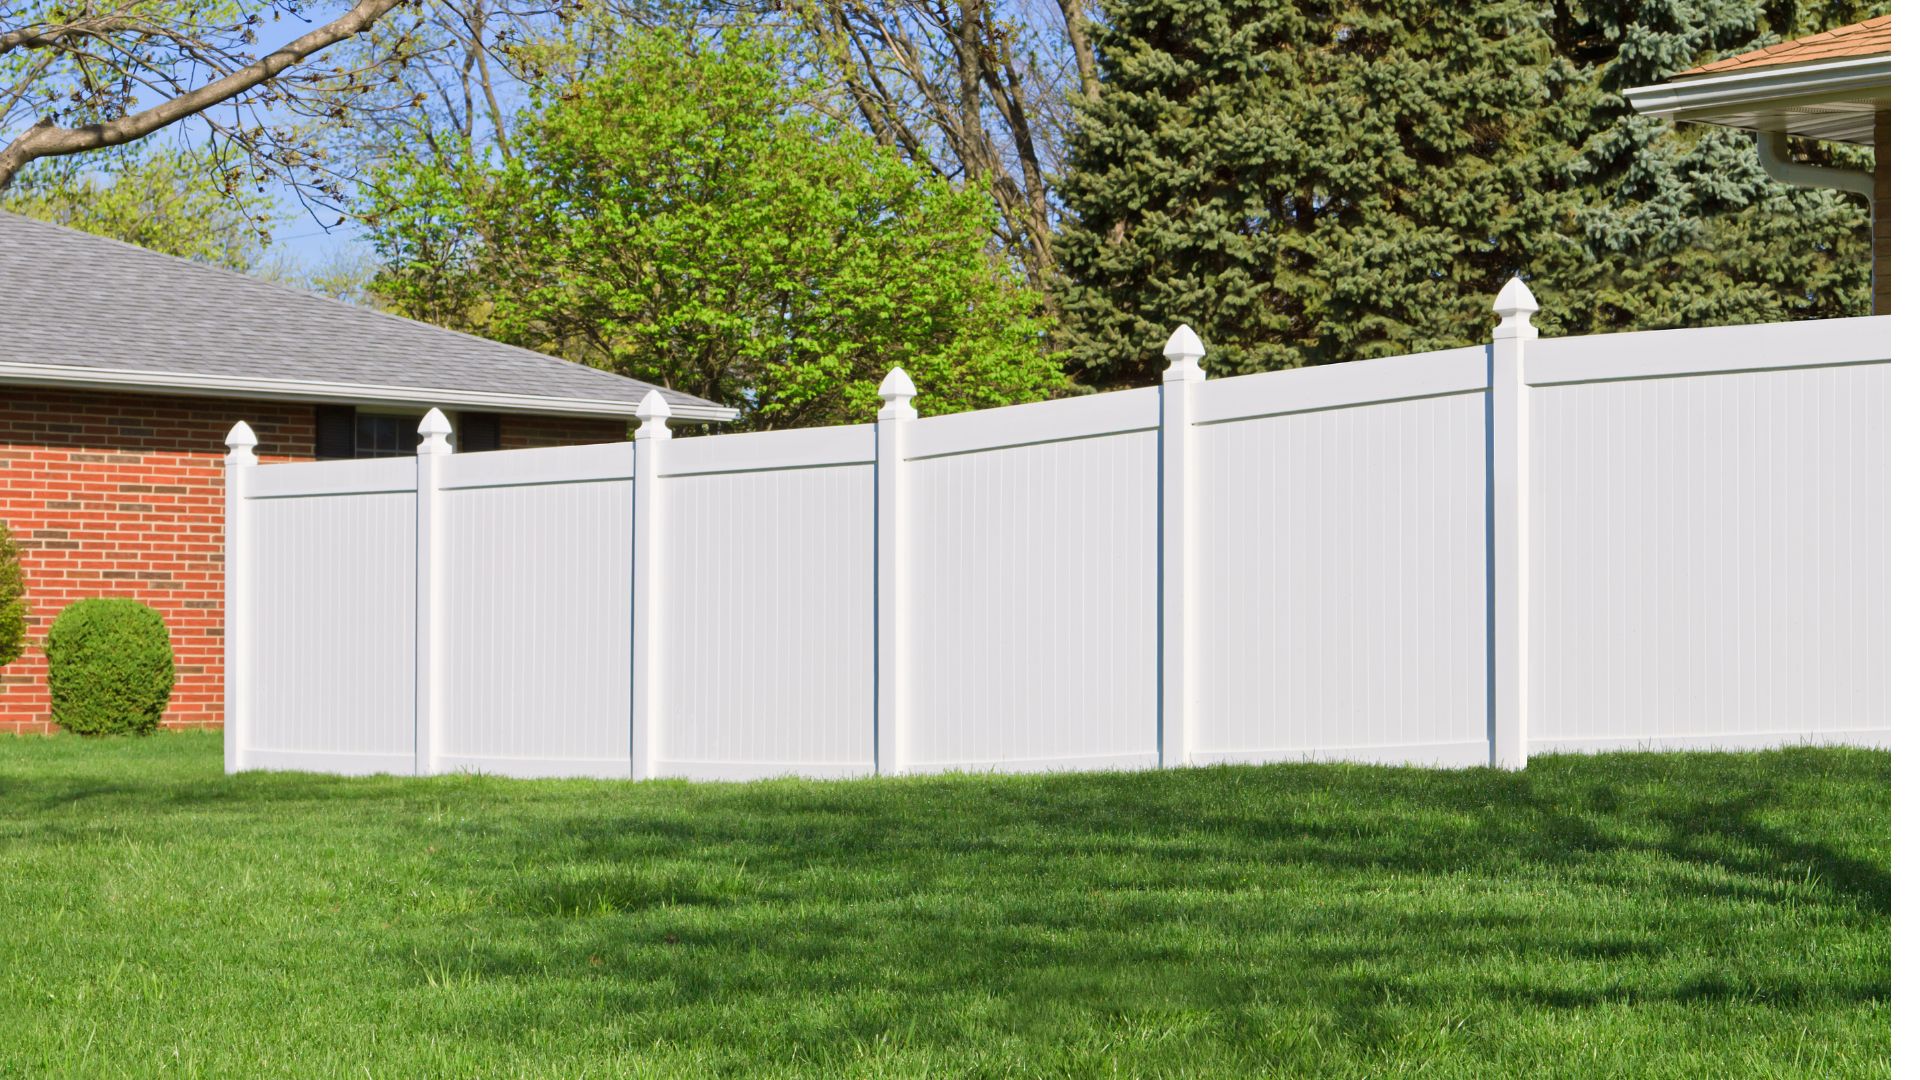 M28684 - Content Marketing Blitz - 4 Things You Need To Know About Vinyl Fencing-featured image